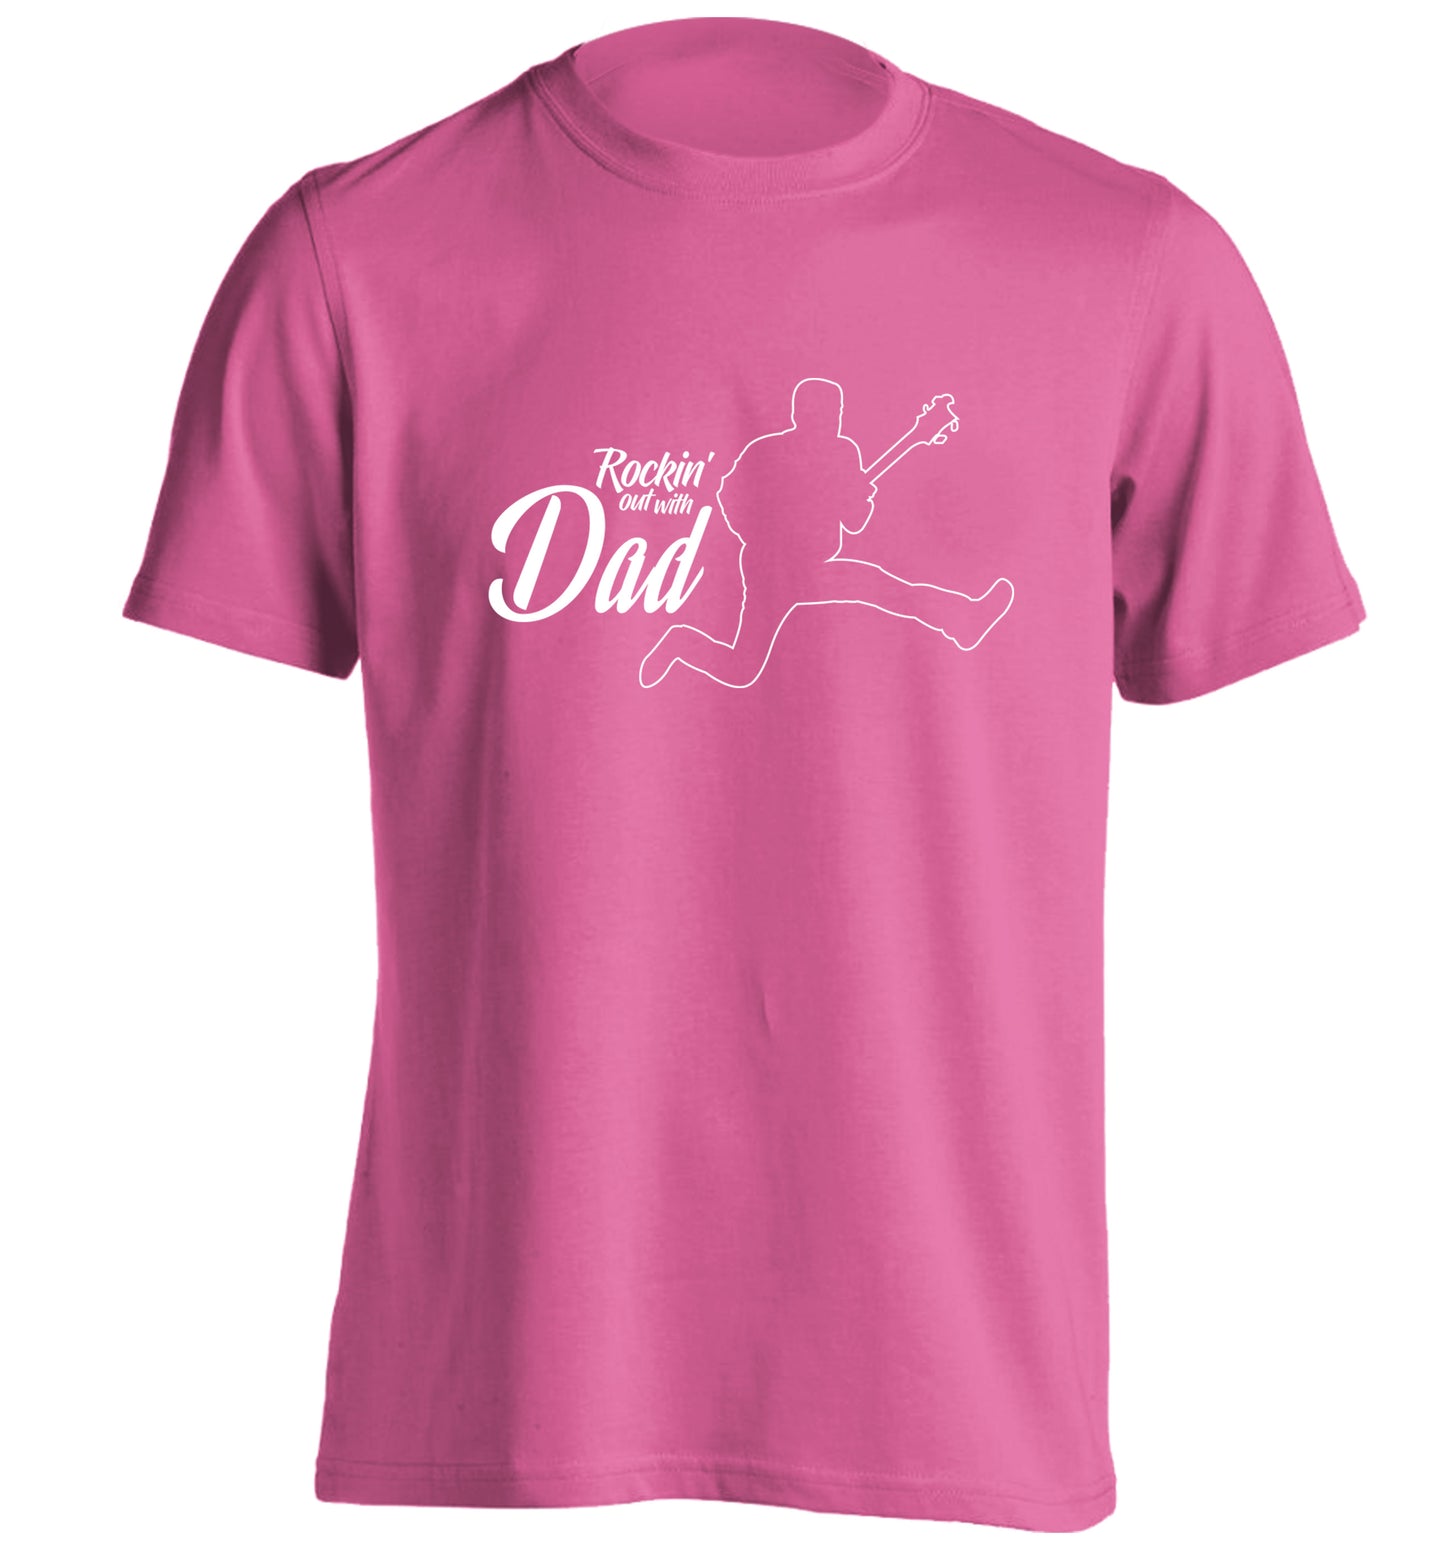 Rockin out with dad adults unisex pink Tshirt 2XL